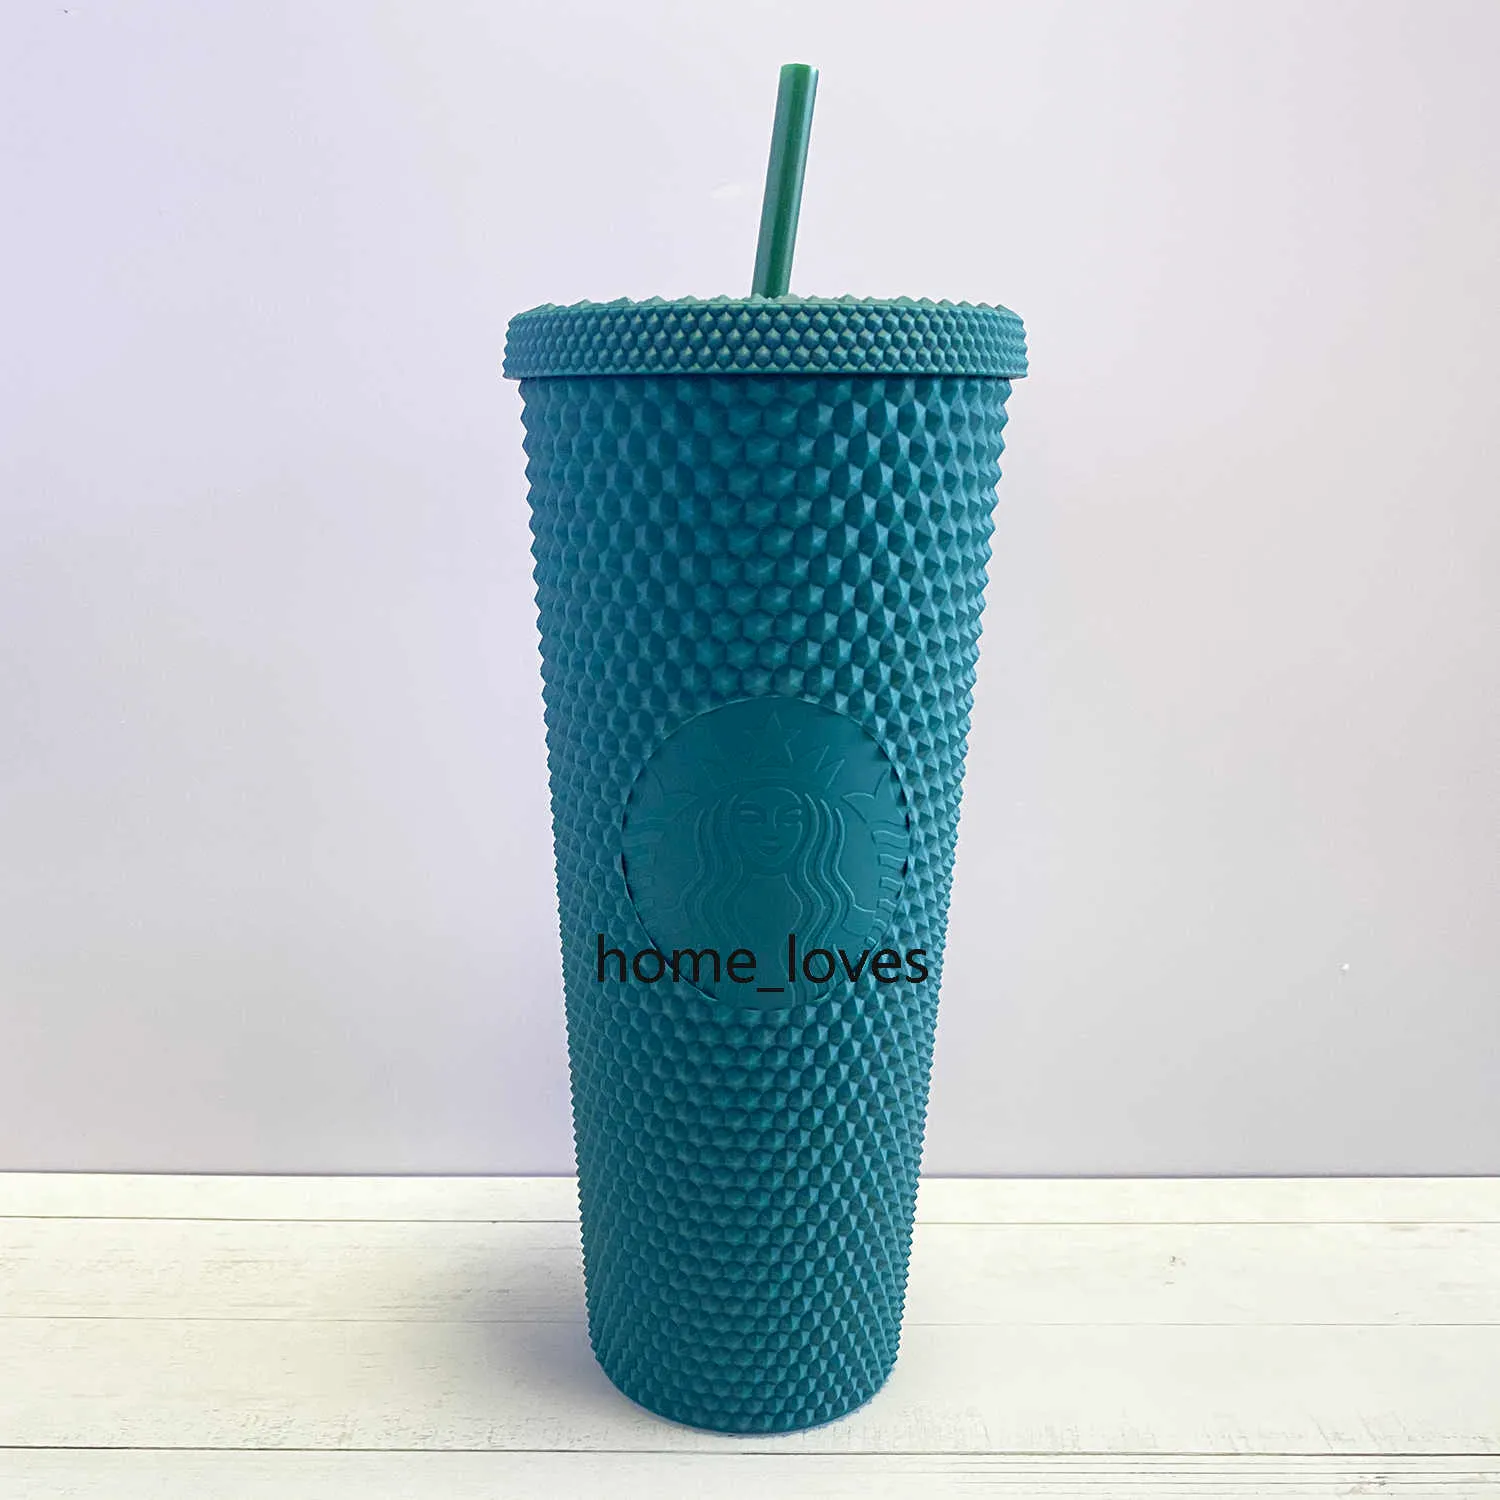 2021 Starbucks Studded Cup Tumblers 710 ml Carbie Pink Matte Black Plastic Mugs With StrawcV2ECV2E320T